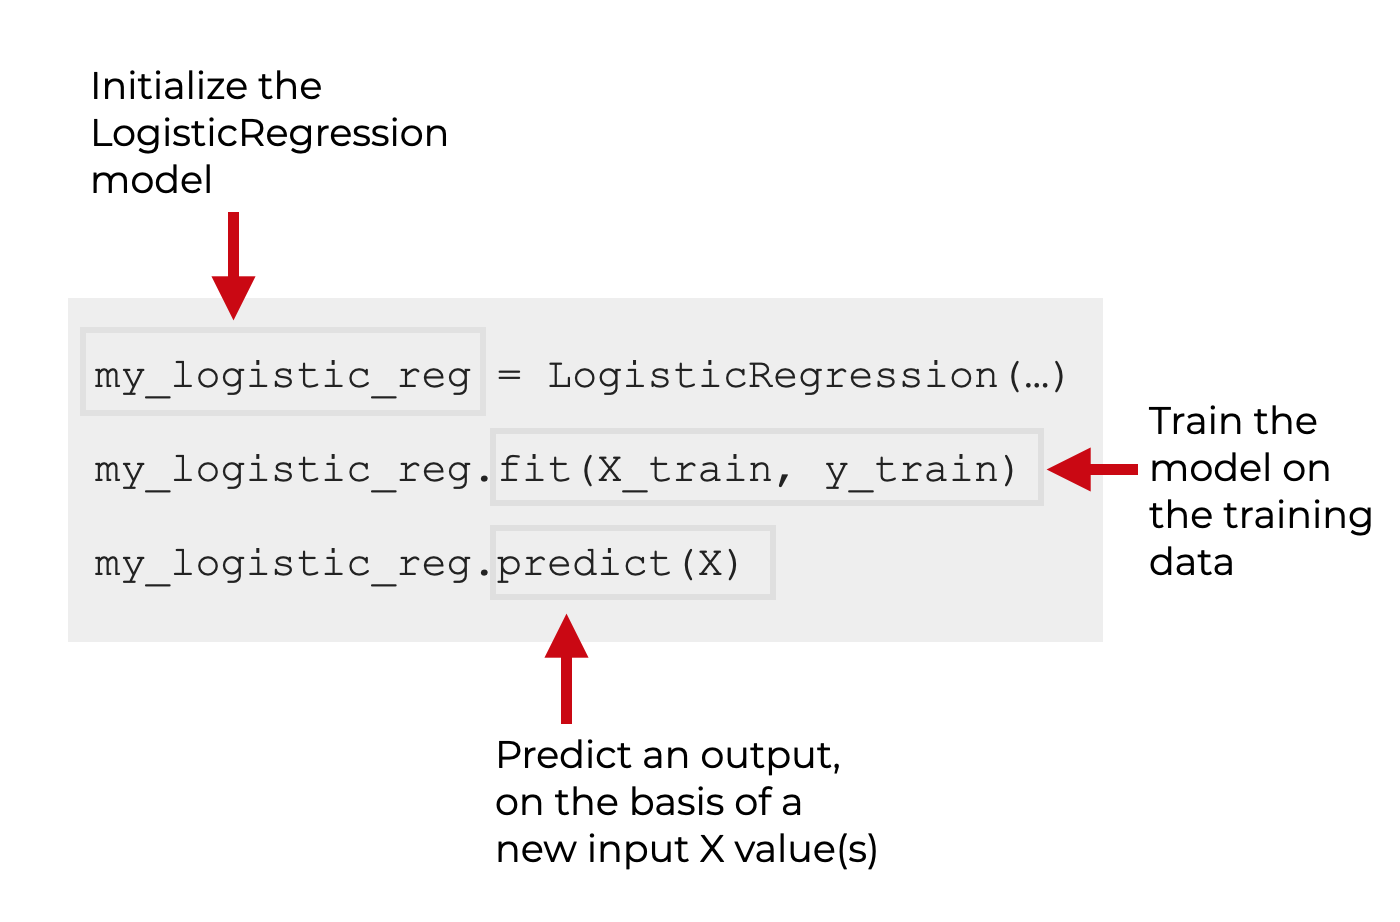 An image that shows the syntax for how to initialize, train, and predict with the Sklearn Logistic Regression function.